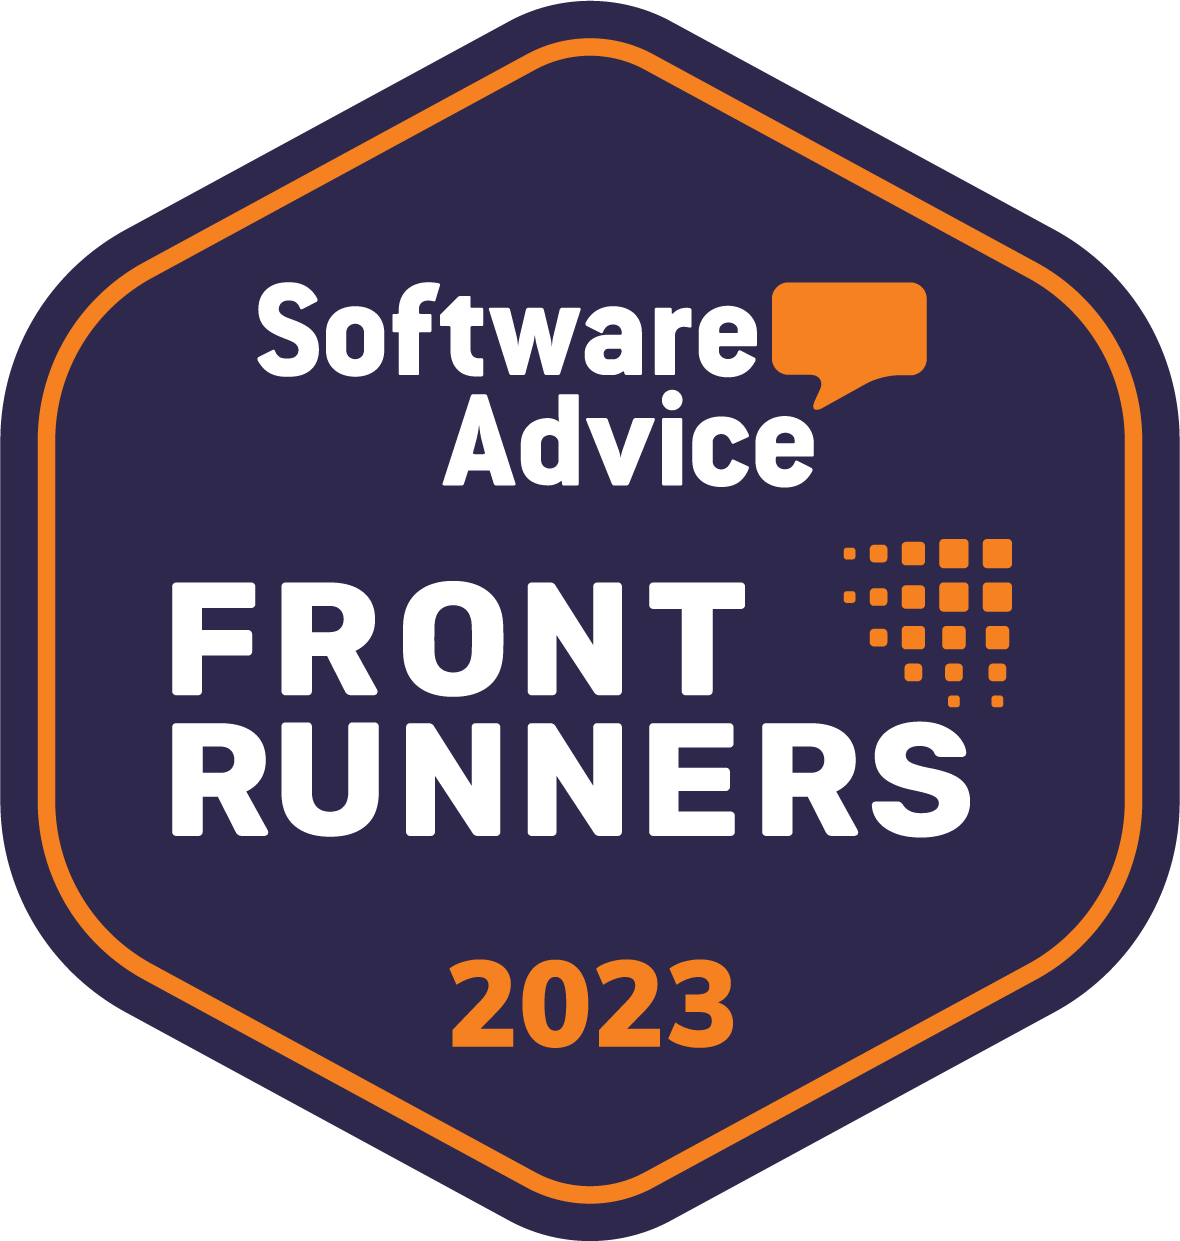 QuoteWerks was named a FrontRunner for Quoting software by Software Advice for 2023